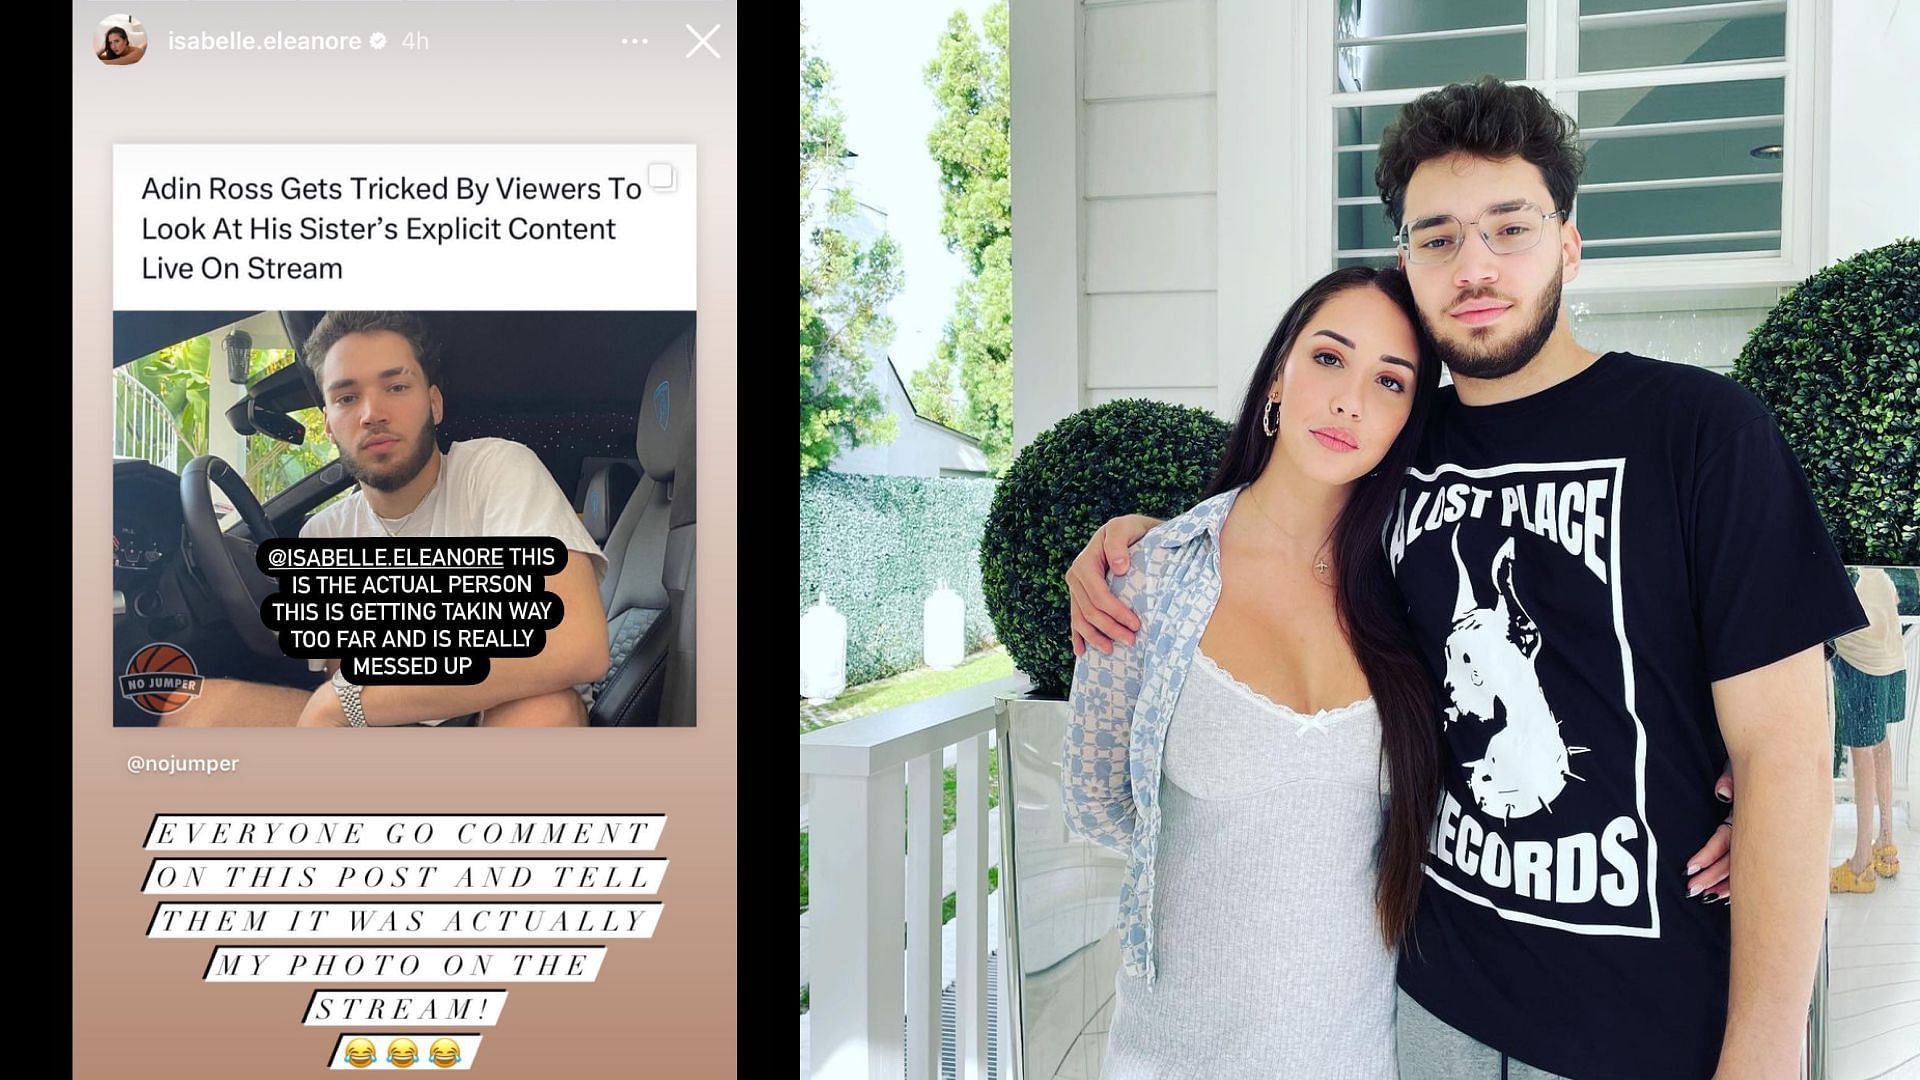 Naomi Ross debunks claims about Adin Ross viewing her sensitive picture on stream (Image via @naomzies/Instagram)